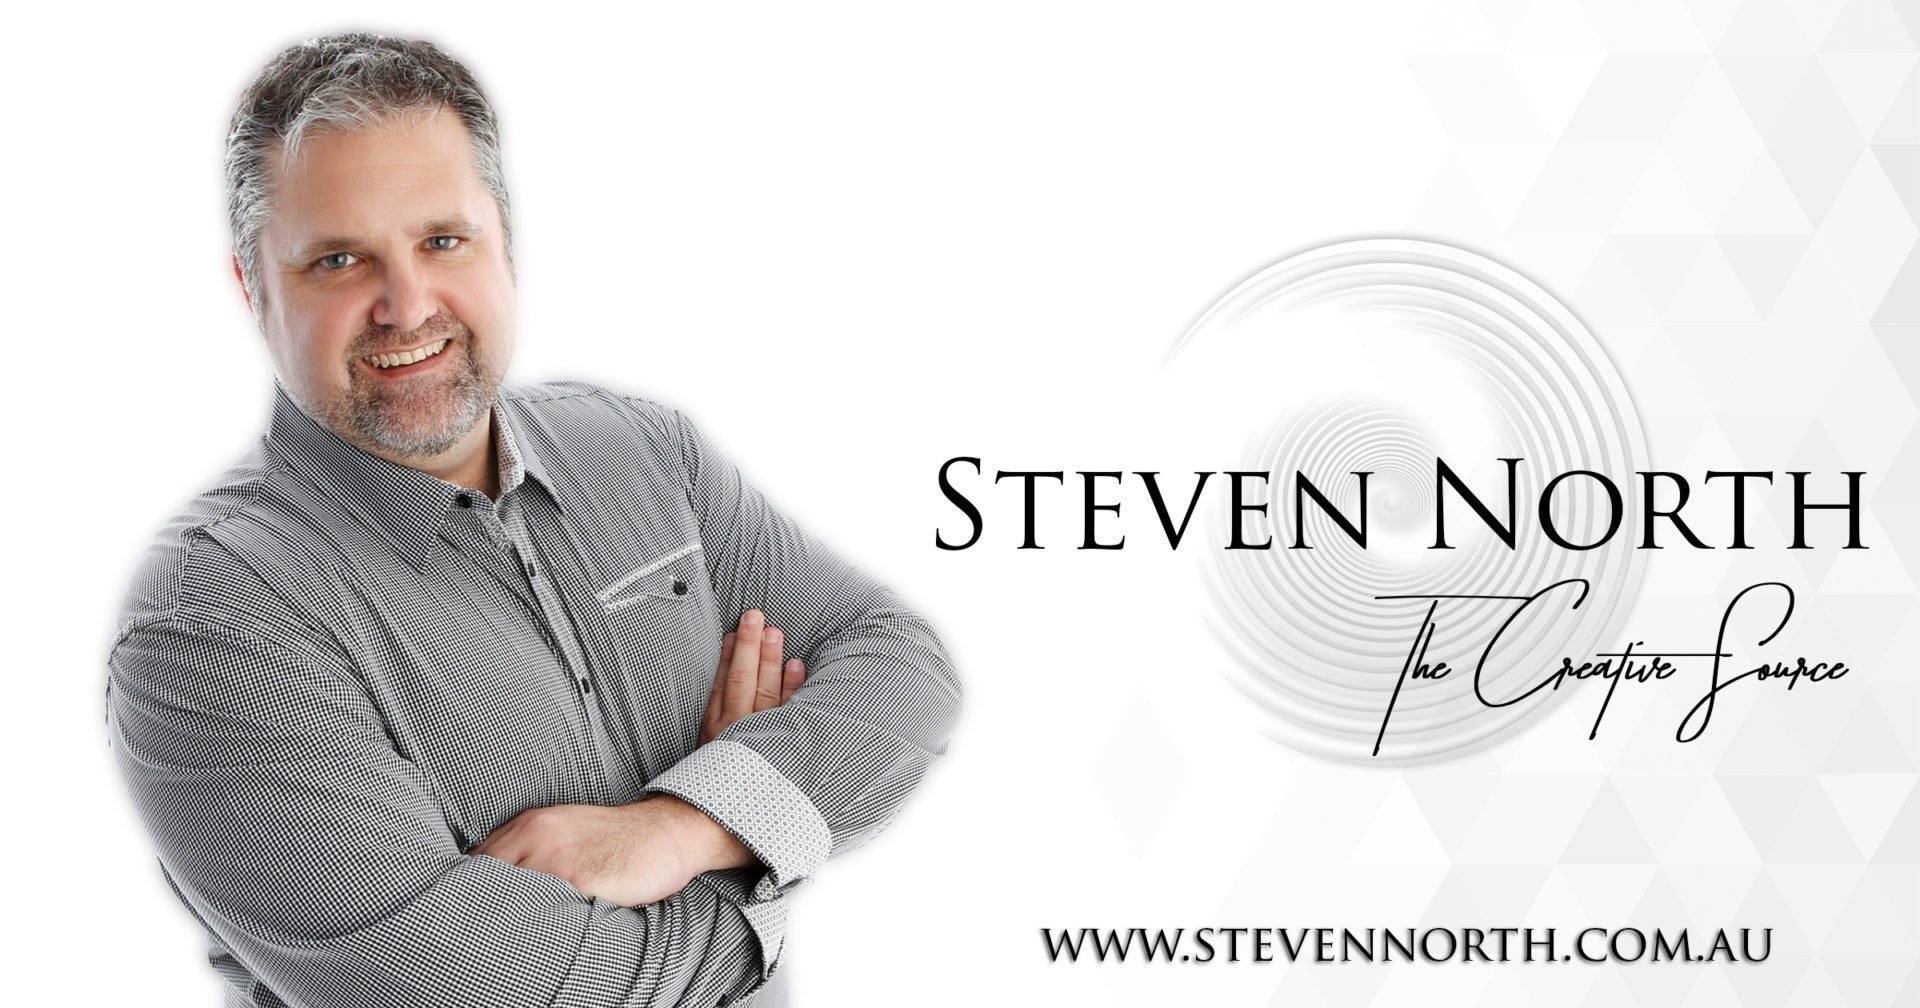 Steven North - The Creative Source For Consciousness